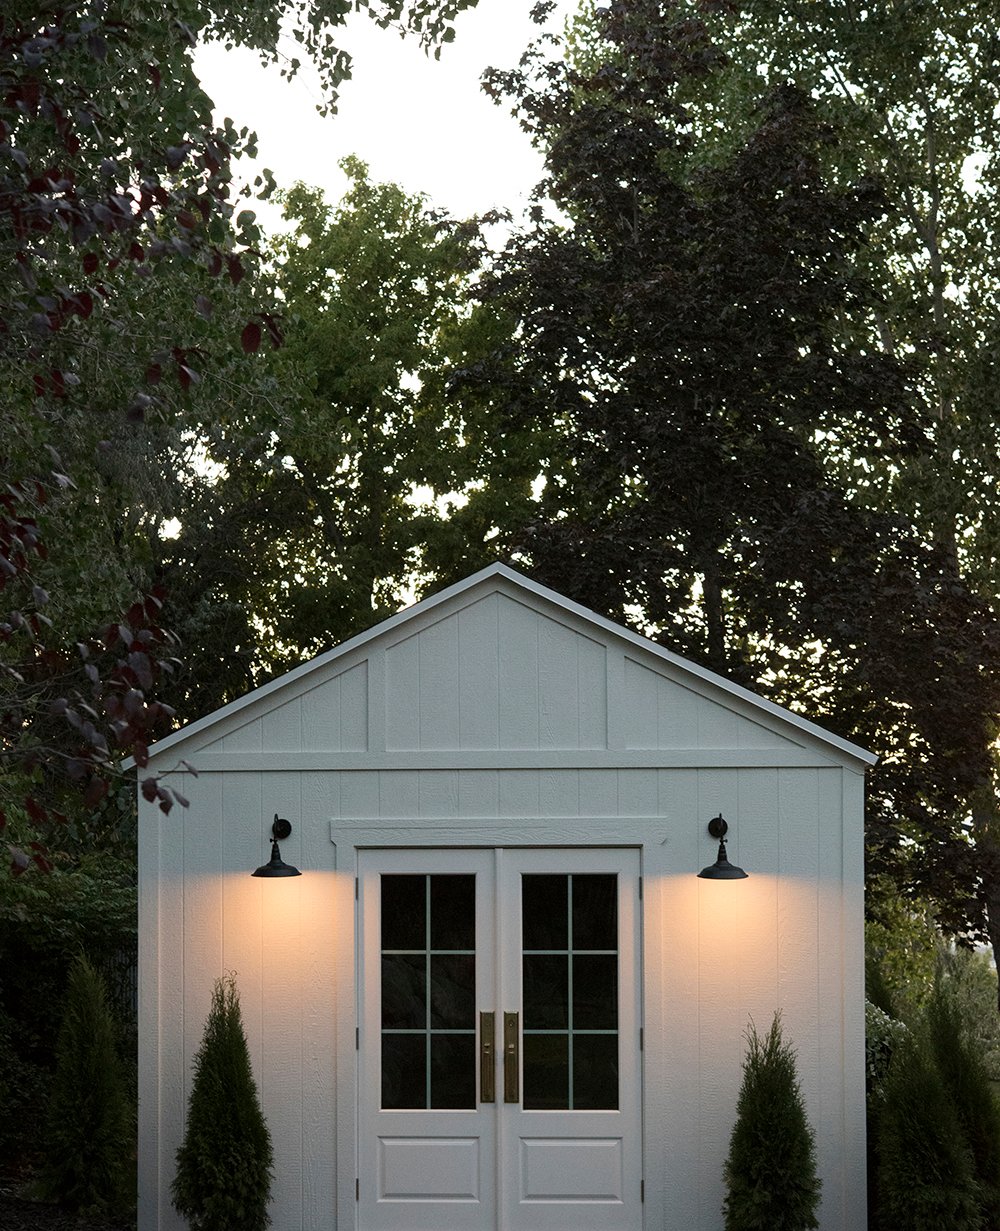 The Shed Reveal - roomfortuesday.com